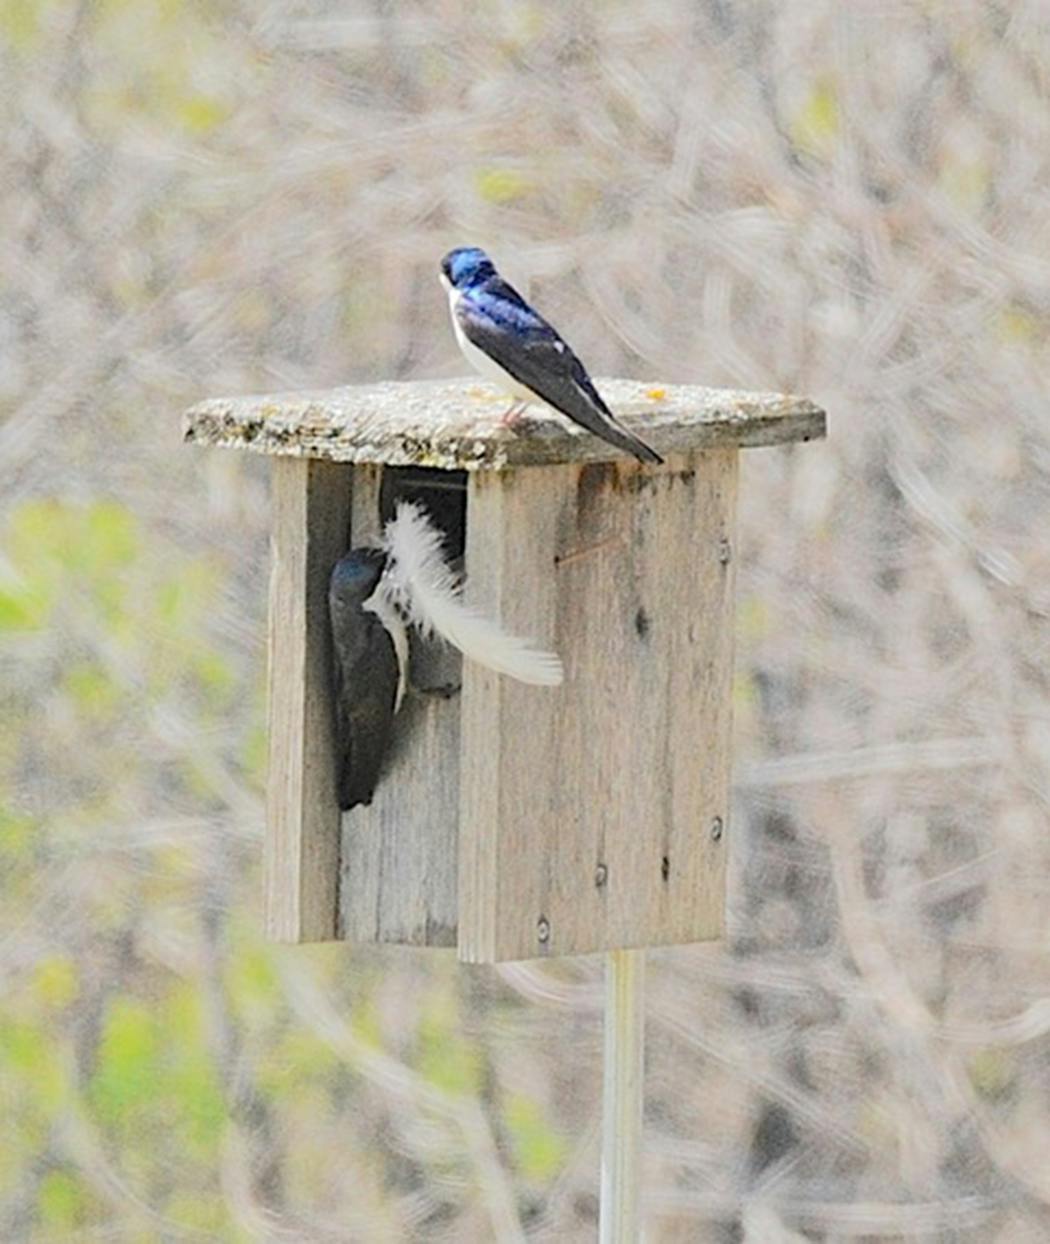 Tree swallows with a feather by a nest box.